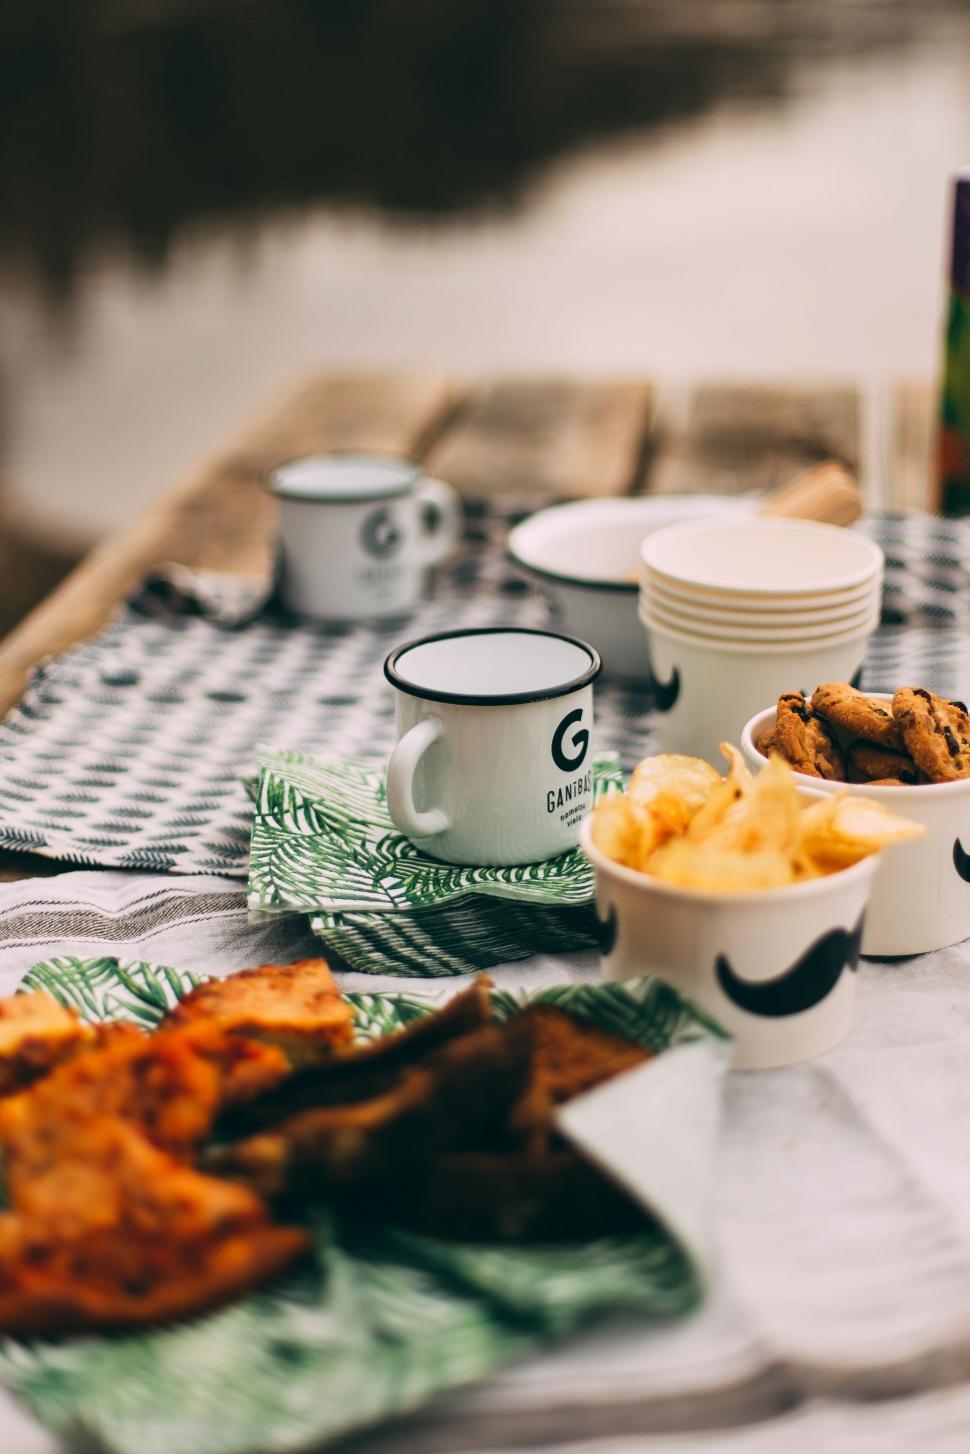 Free Image of Table Set With Plates of Food and Cups 